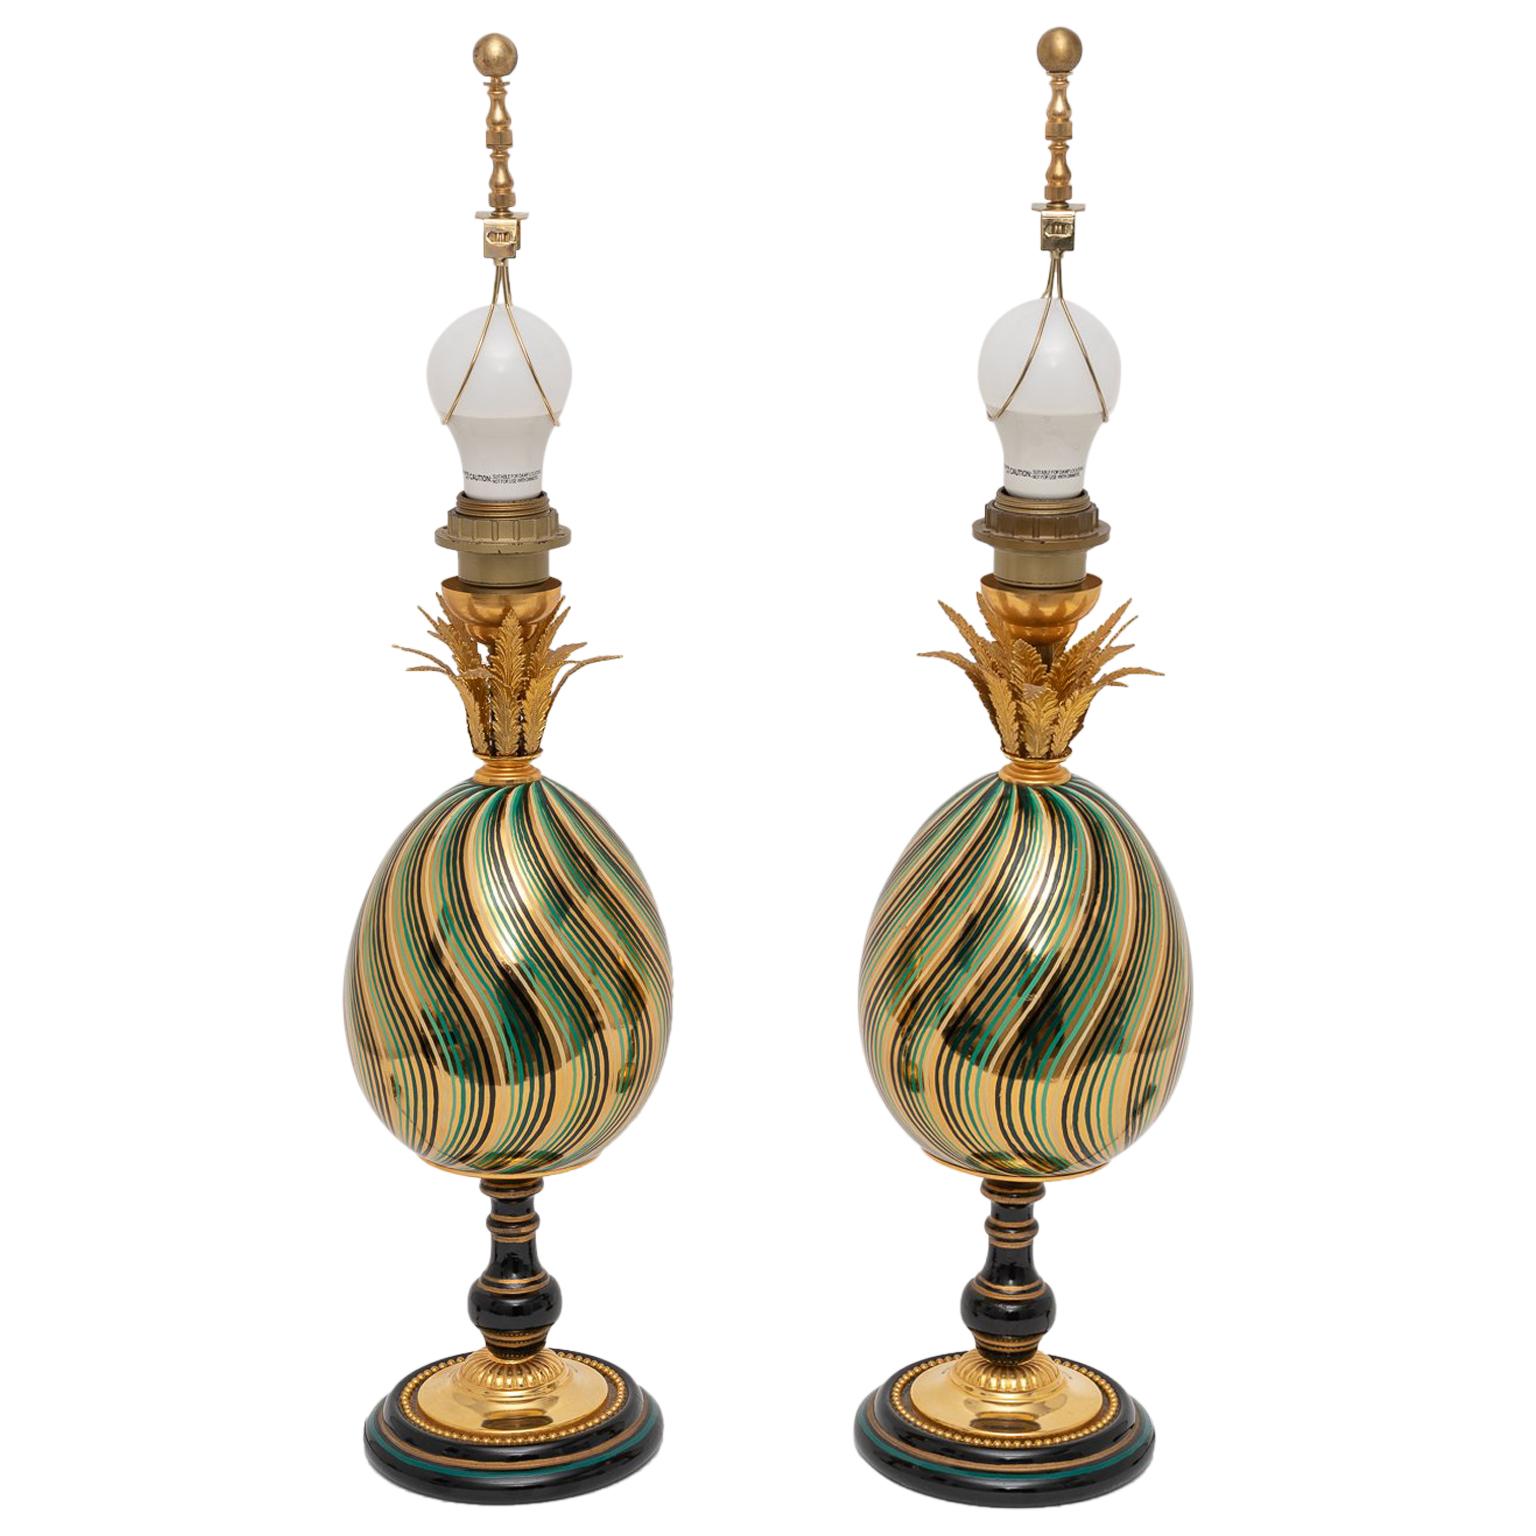 Pair of Egg Form Table Lamps